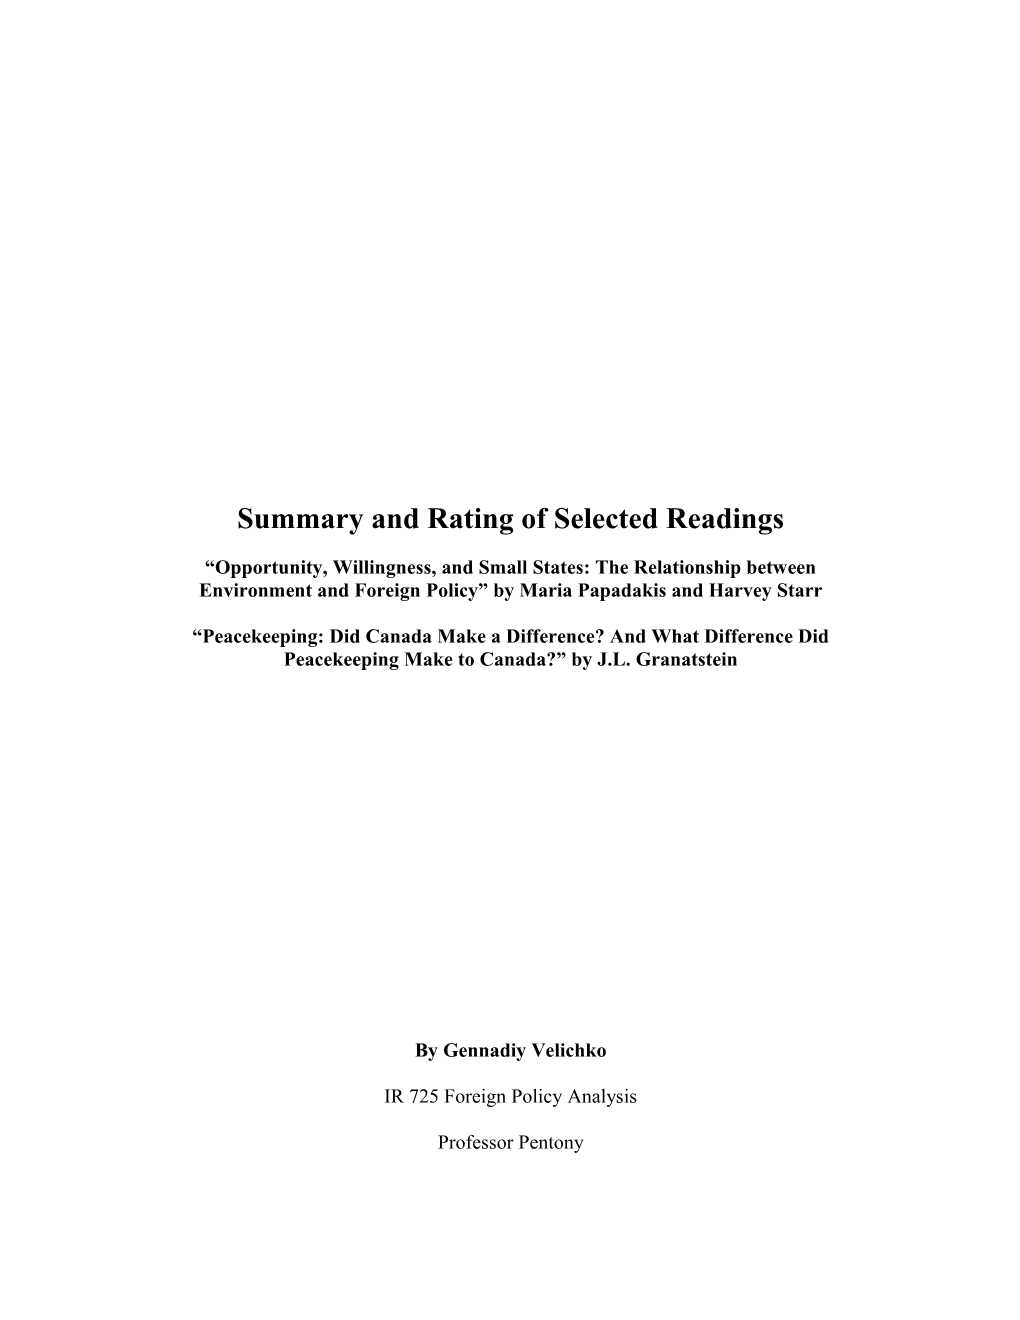 Summary and Rating of Selected Readings